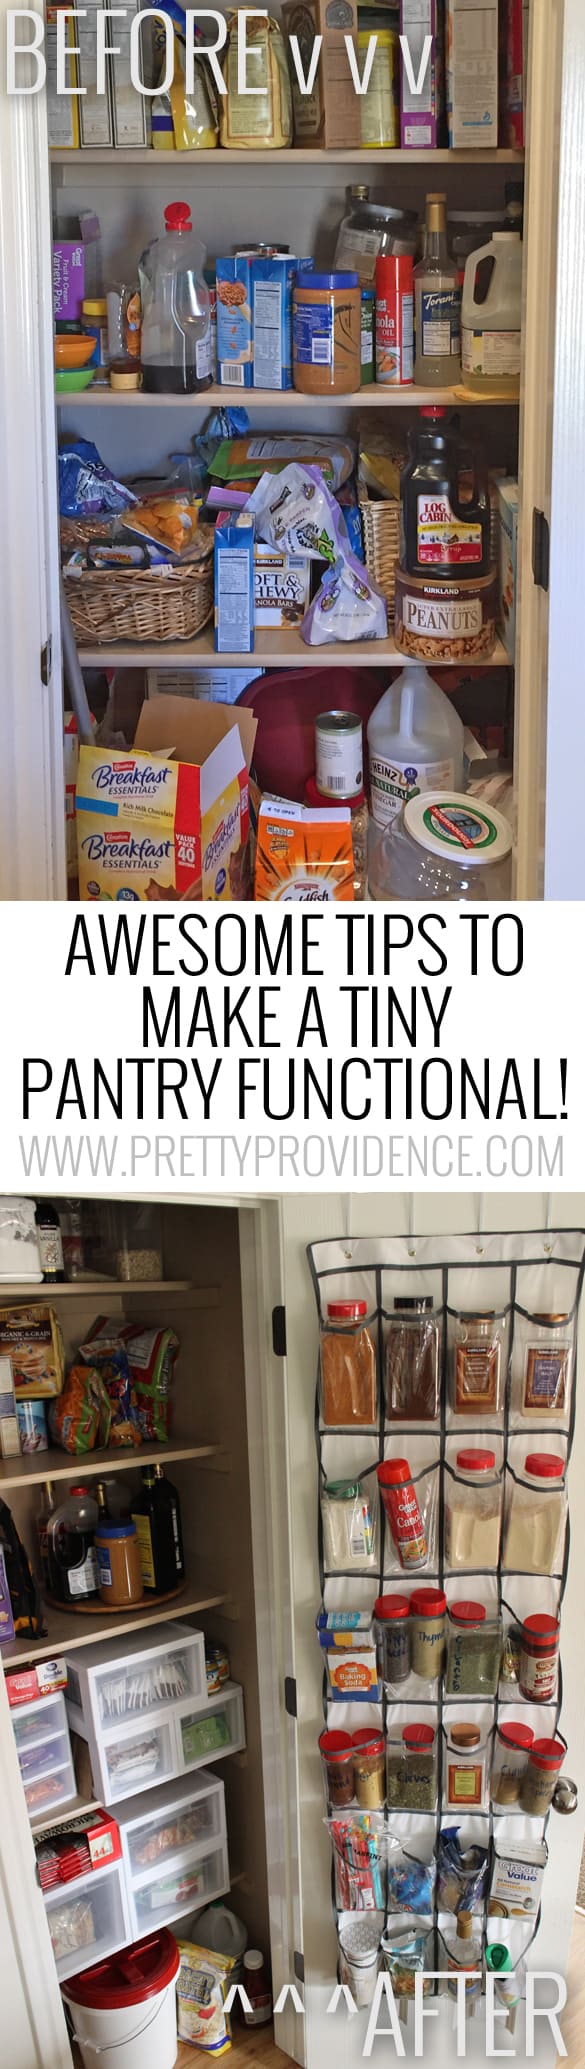 Okay there are some seriously amazing tips in here! I have always hated my tiny pantry, and I can't wait to turn it into this! 